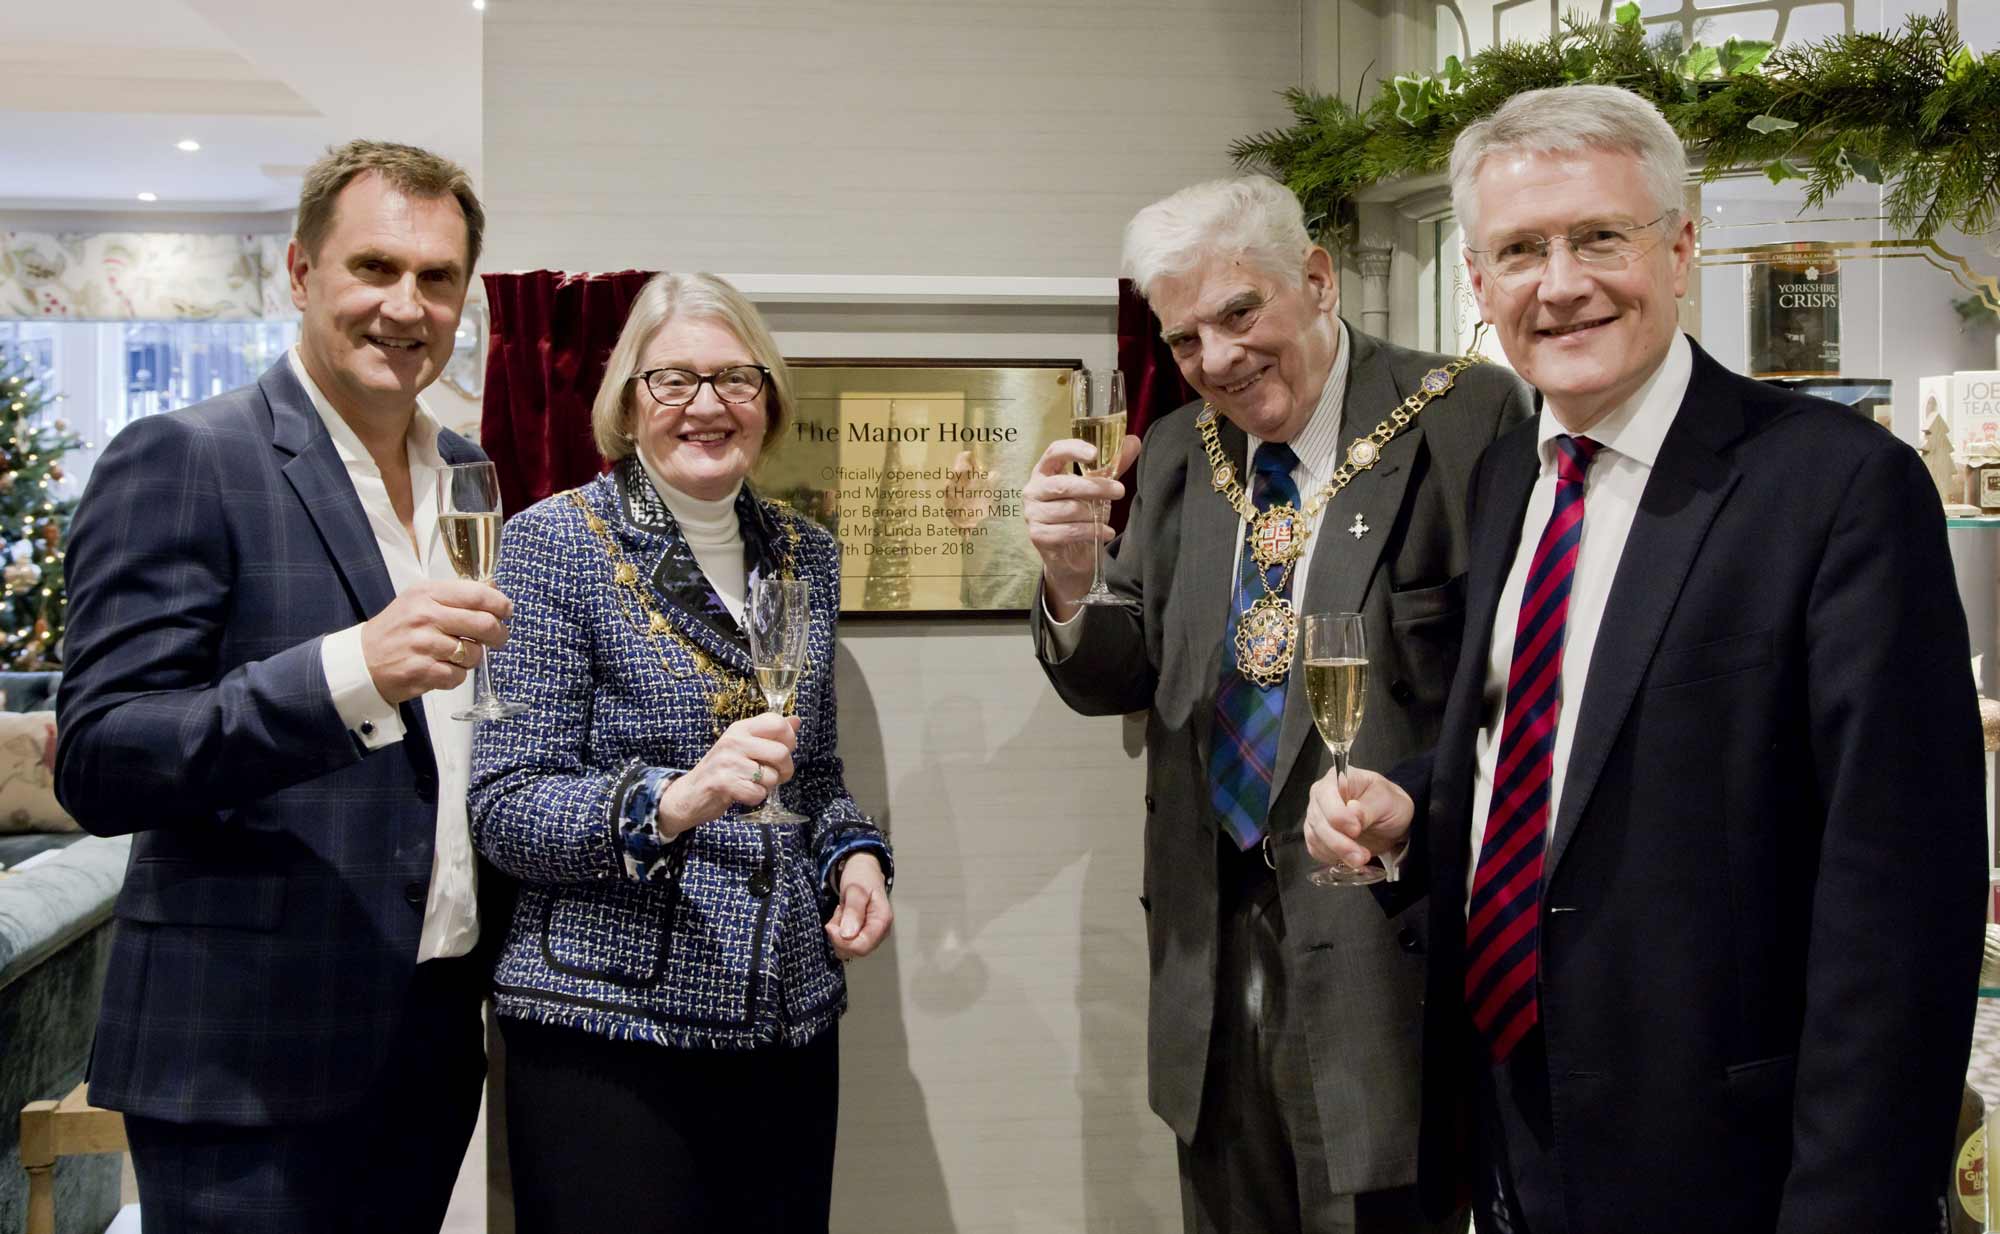 The official opening of The Manor House Harrogate was performed by the Mayor and Mayoress of Harrogate, Councillor Bernard Bateman MBE and Mrs Linda Bateman, on Friday 7 December. The £15m care home on Cornwall Road, part of the Duchy Estate, is the latest to be developed and operated by luxury care group Hadrian Healthcare. Ian Watson, chairman of Hadrian Healthcare is pictured left with the Mayor and Mayoress of Harrogate, and Andrew Jones MP for Harrogate and Knaresborough